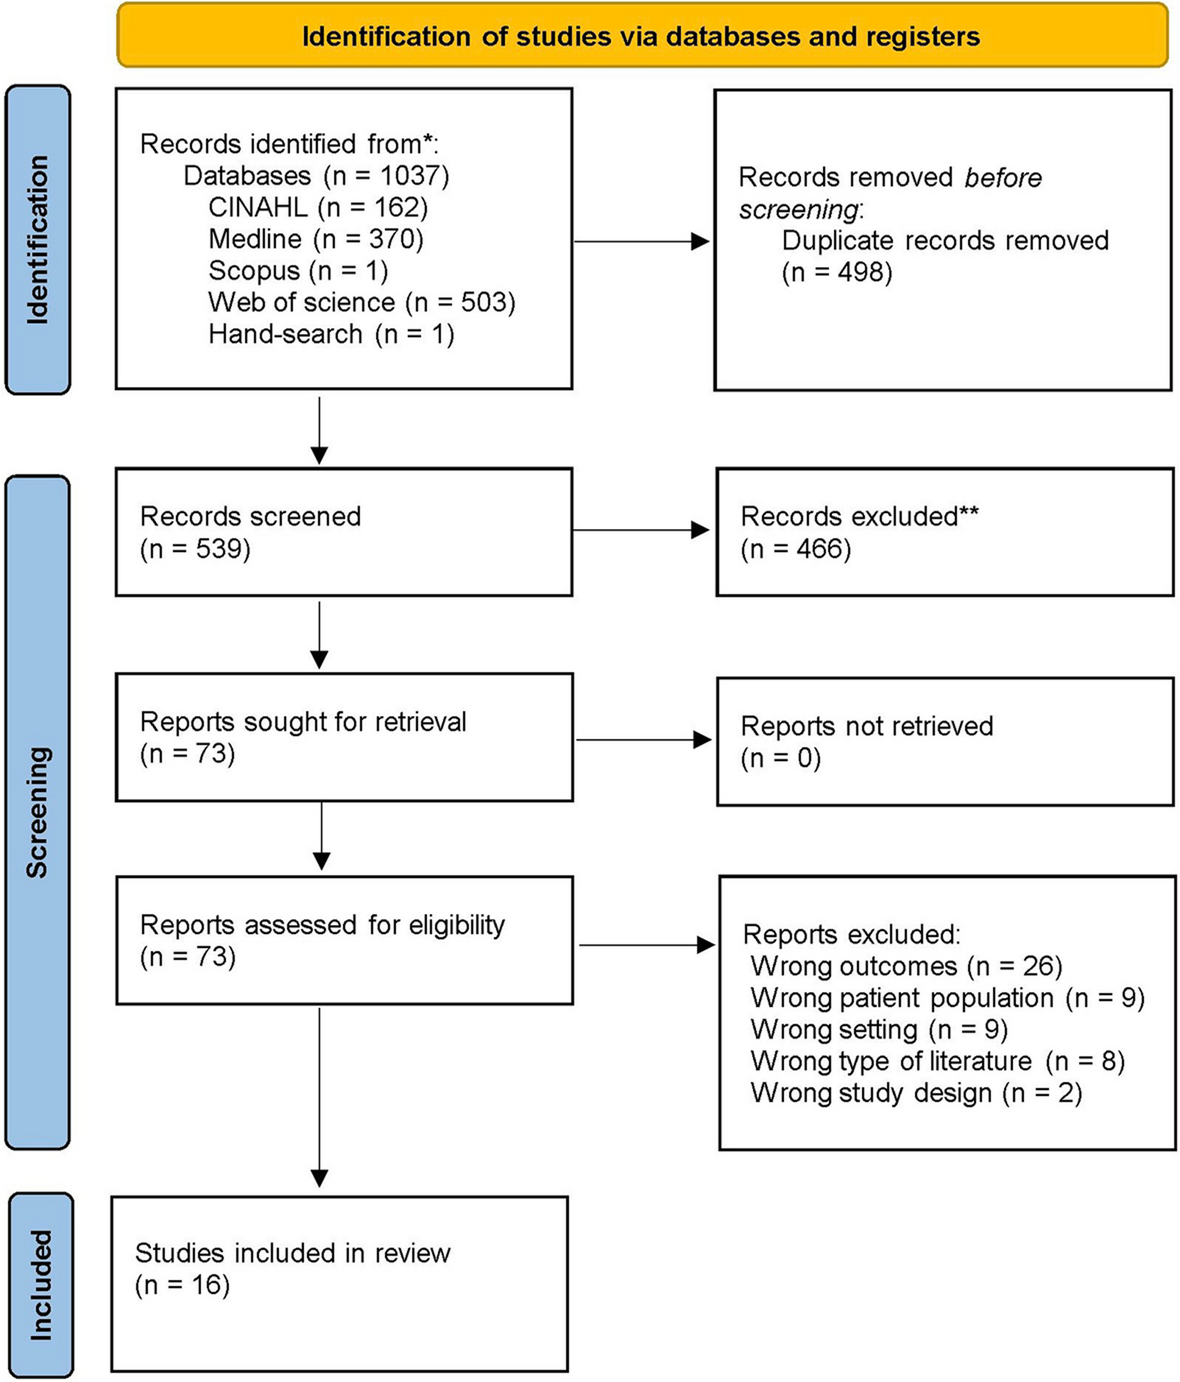 Promoting breastfeeding in women with gestational diabetes mellitus in high-income settings: an integrative review